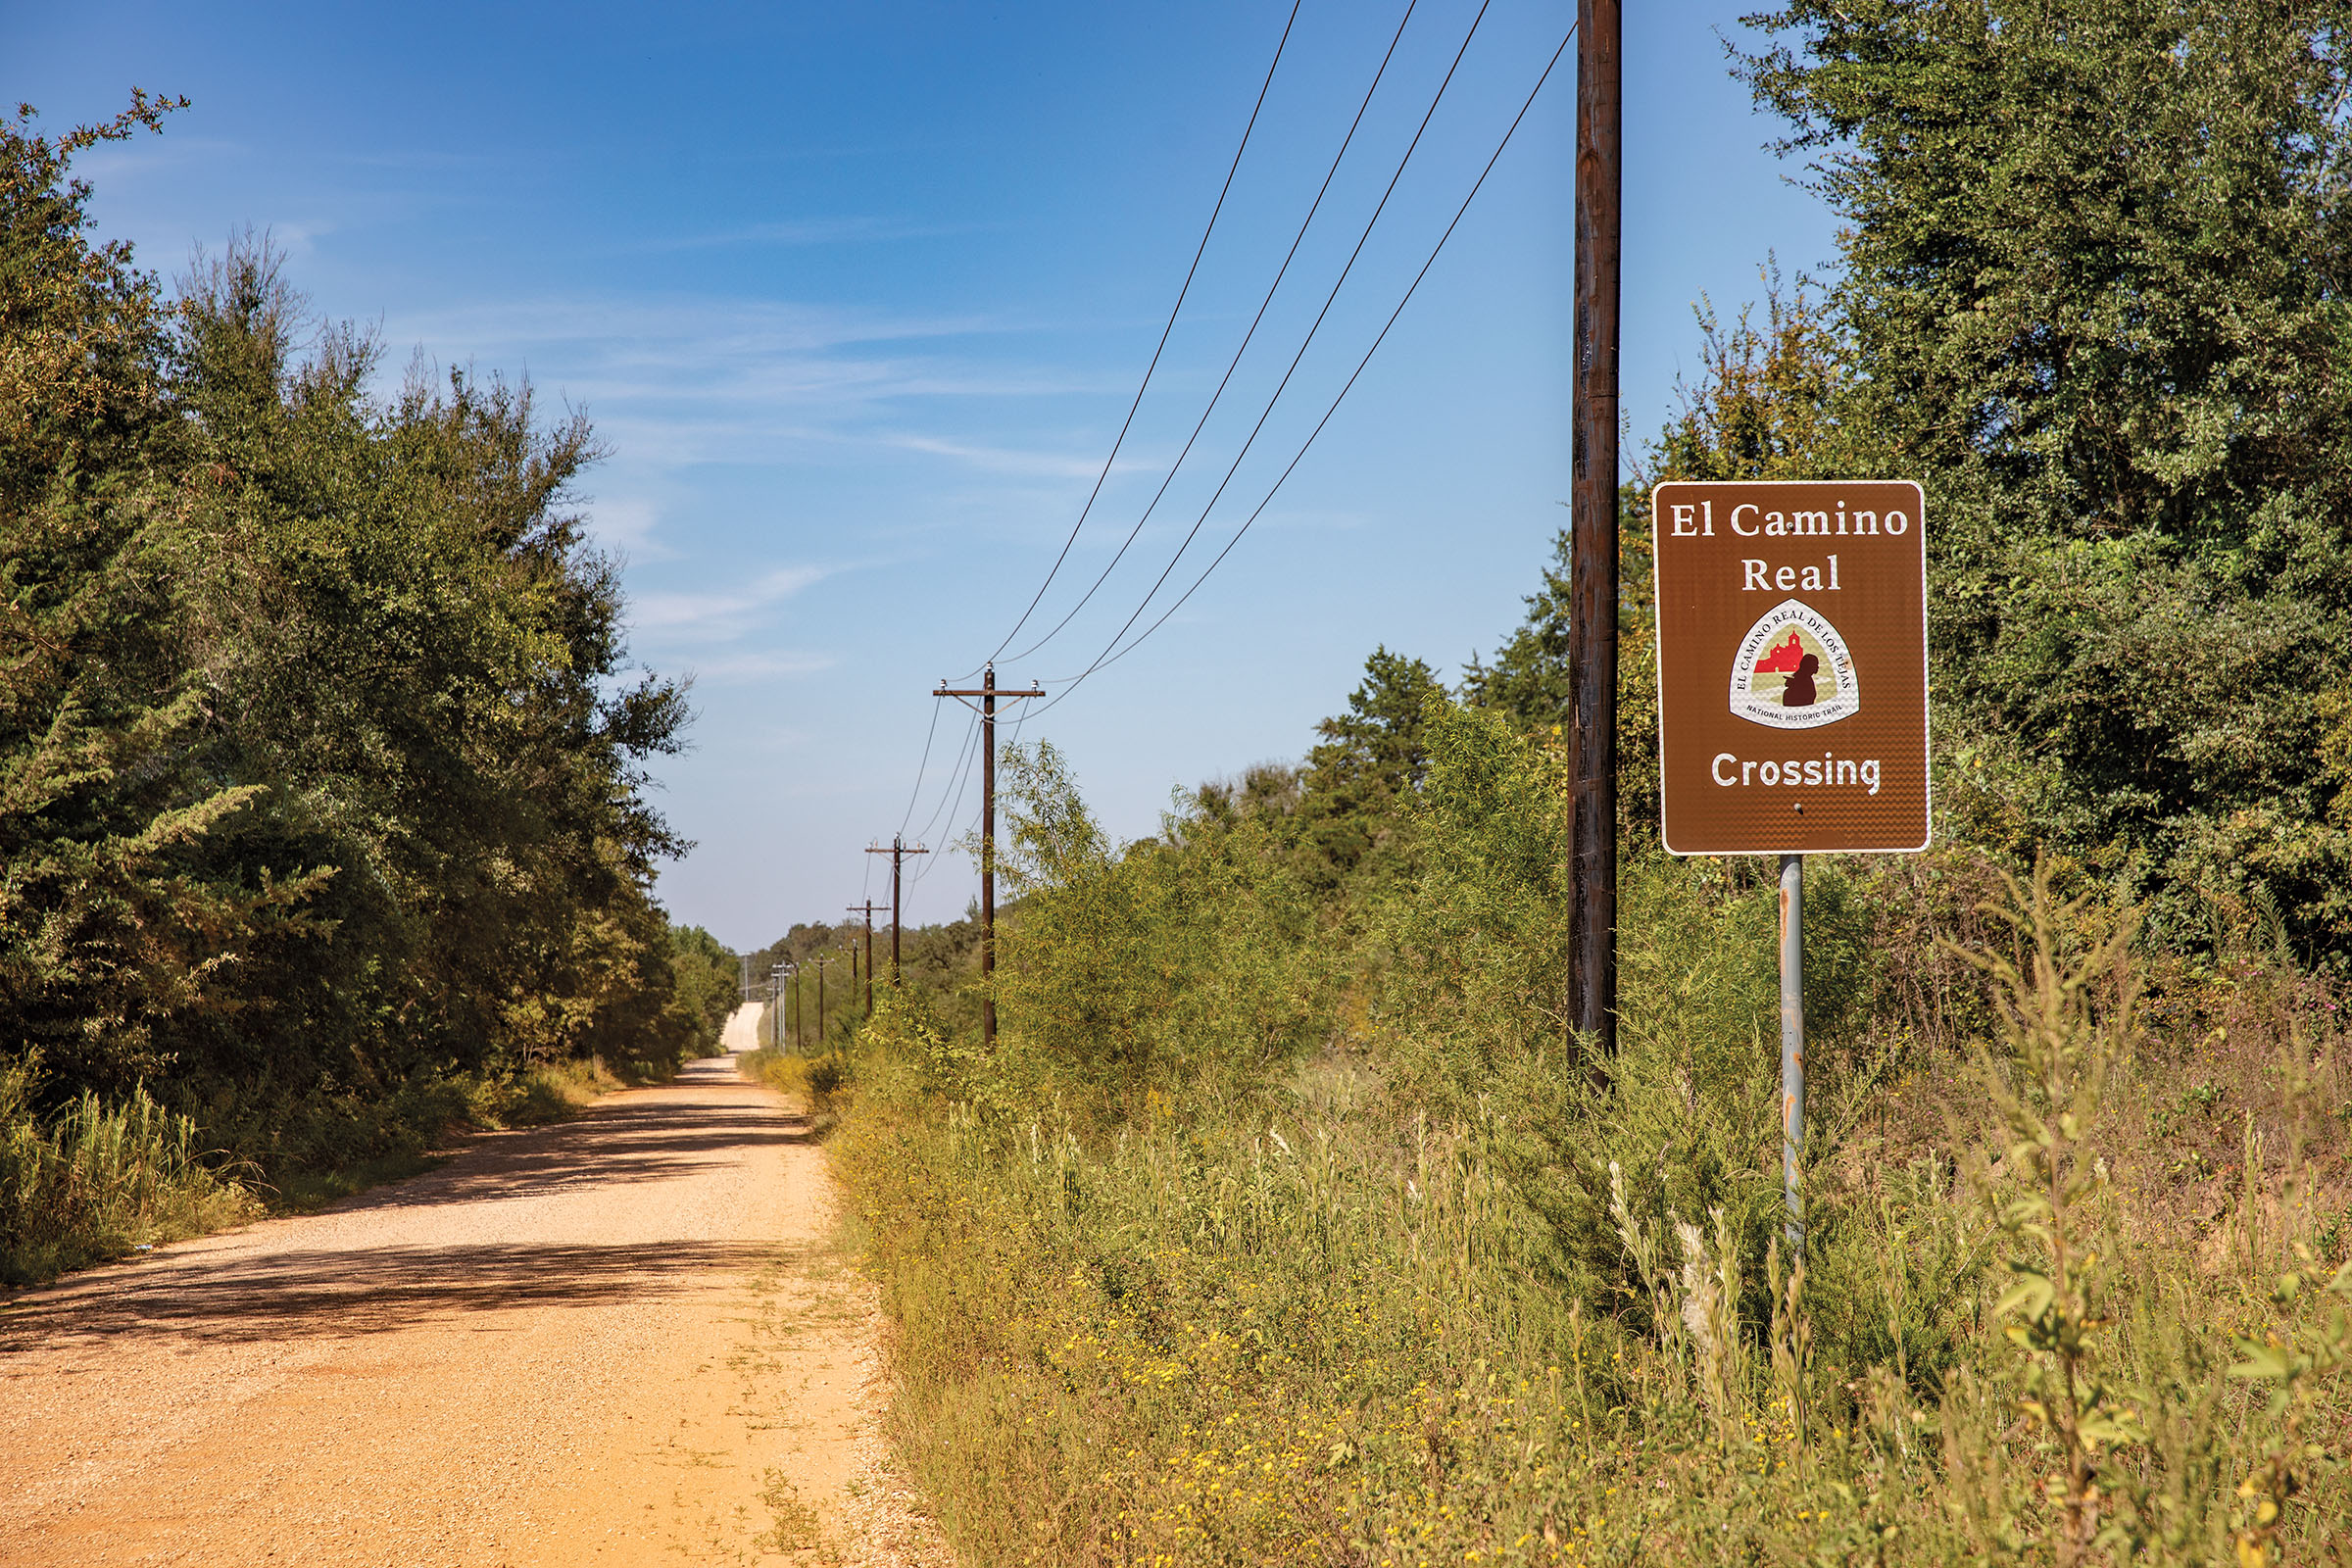 A brown sign reading "El Campino Real Crossing" alongside a dirt road with short grasses and trees on each side